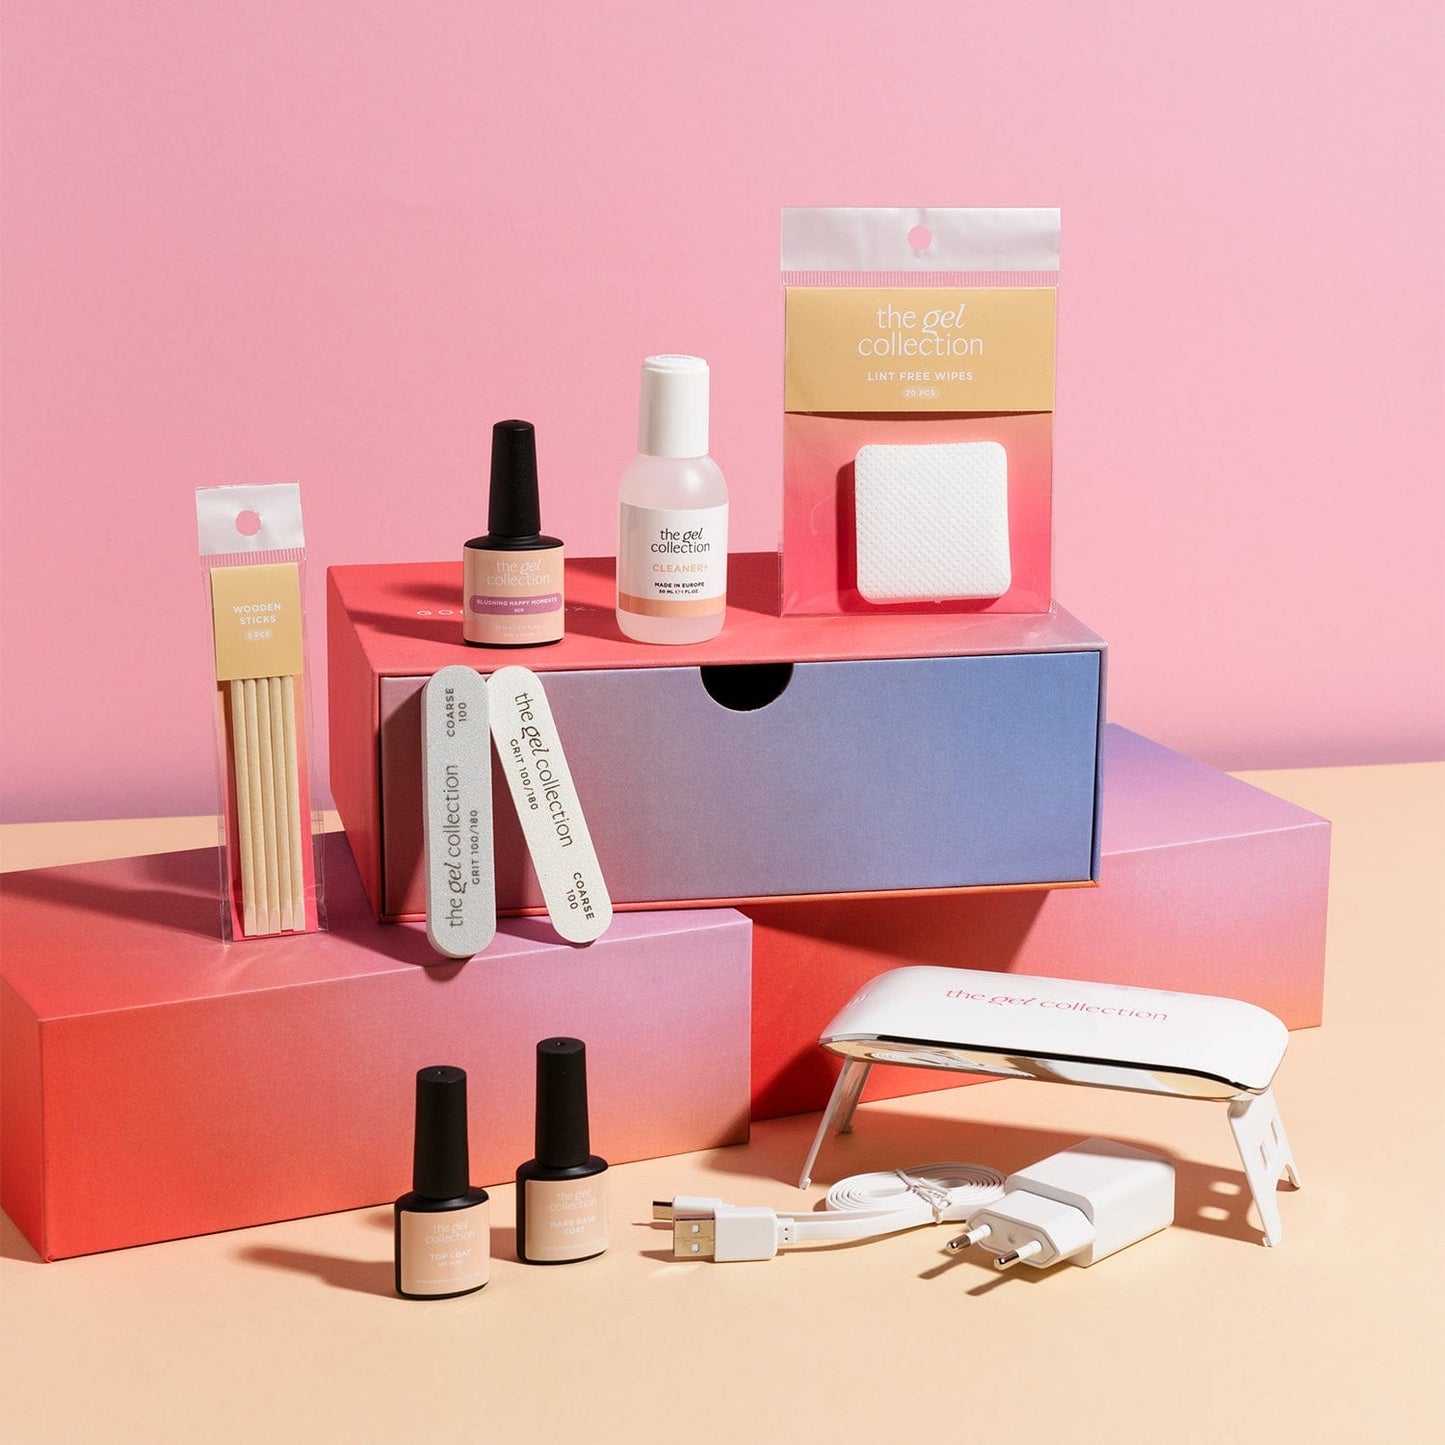 The 'Gel Collection' Box